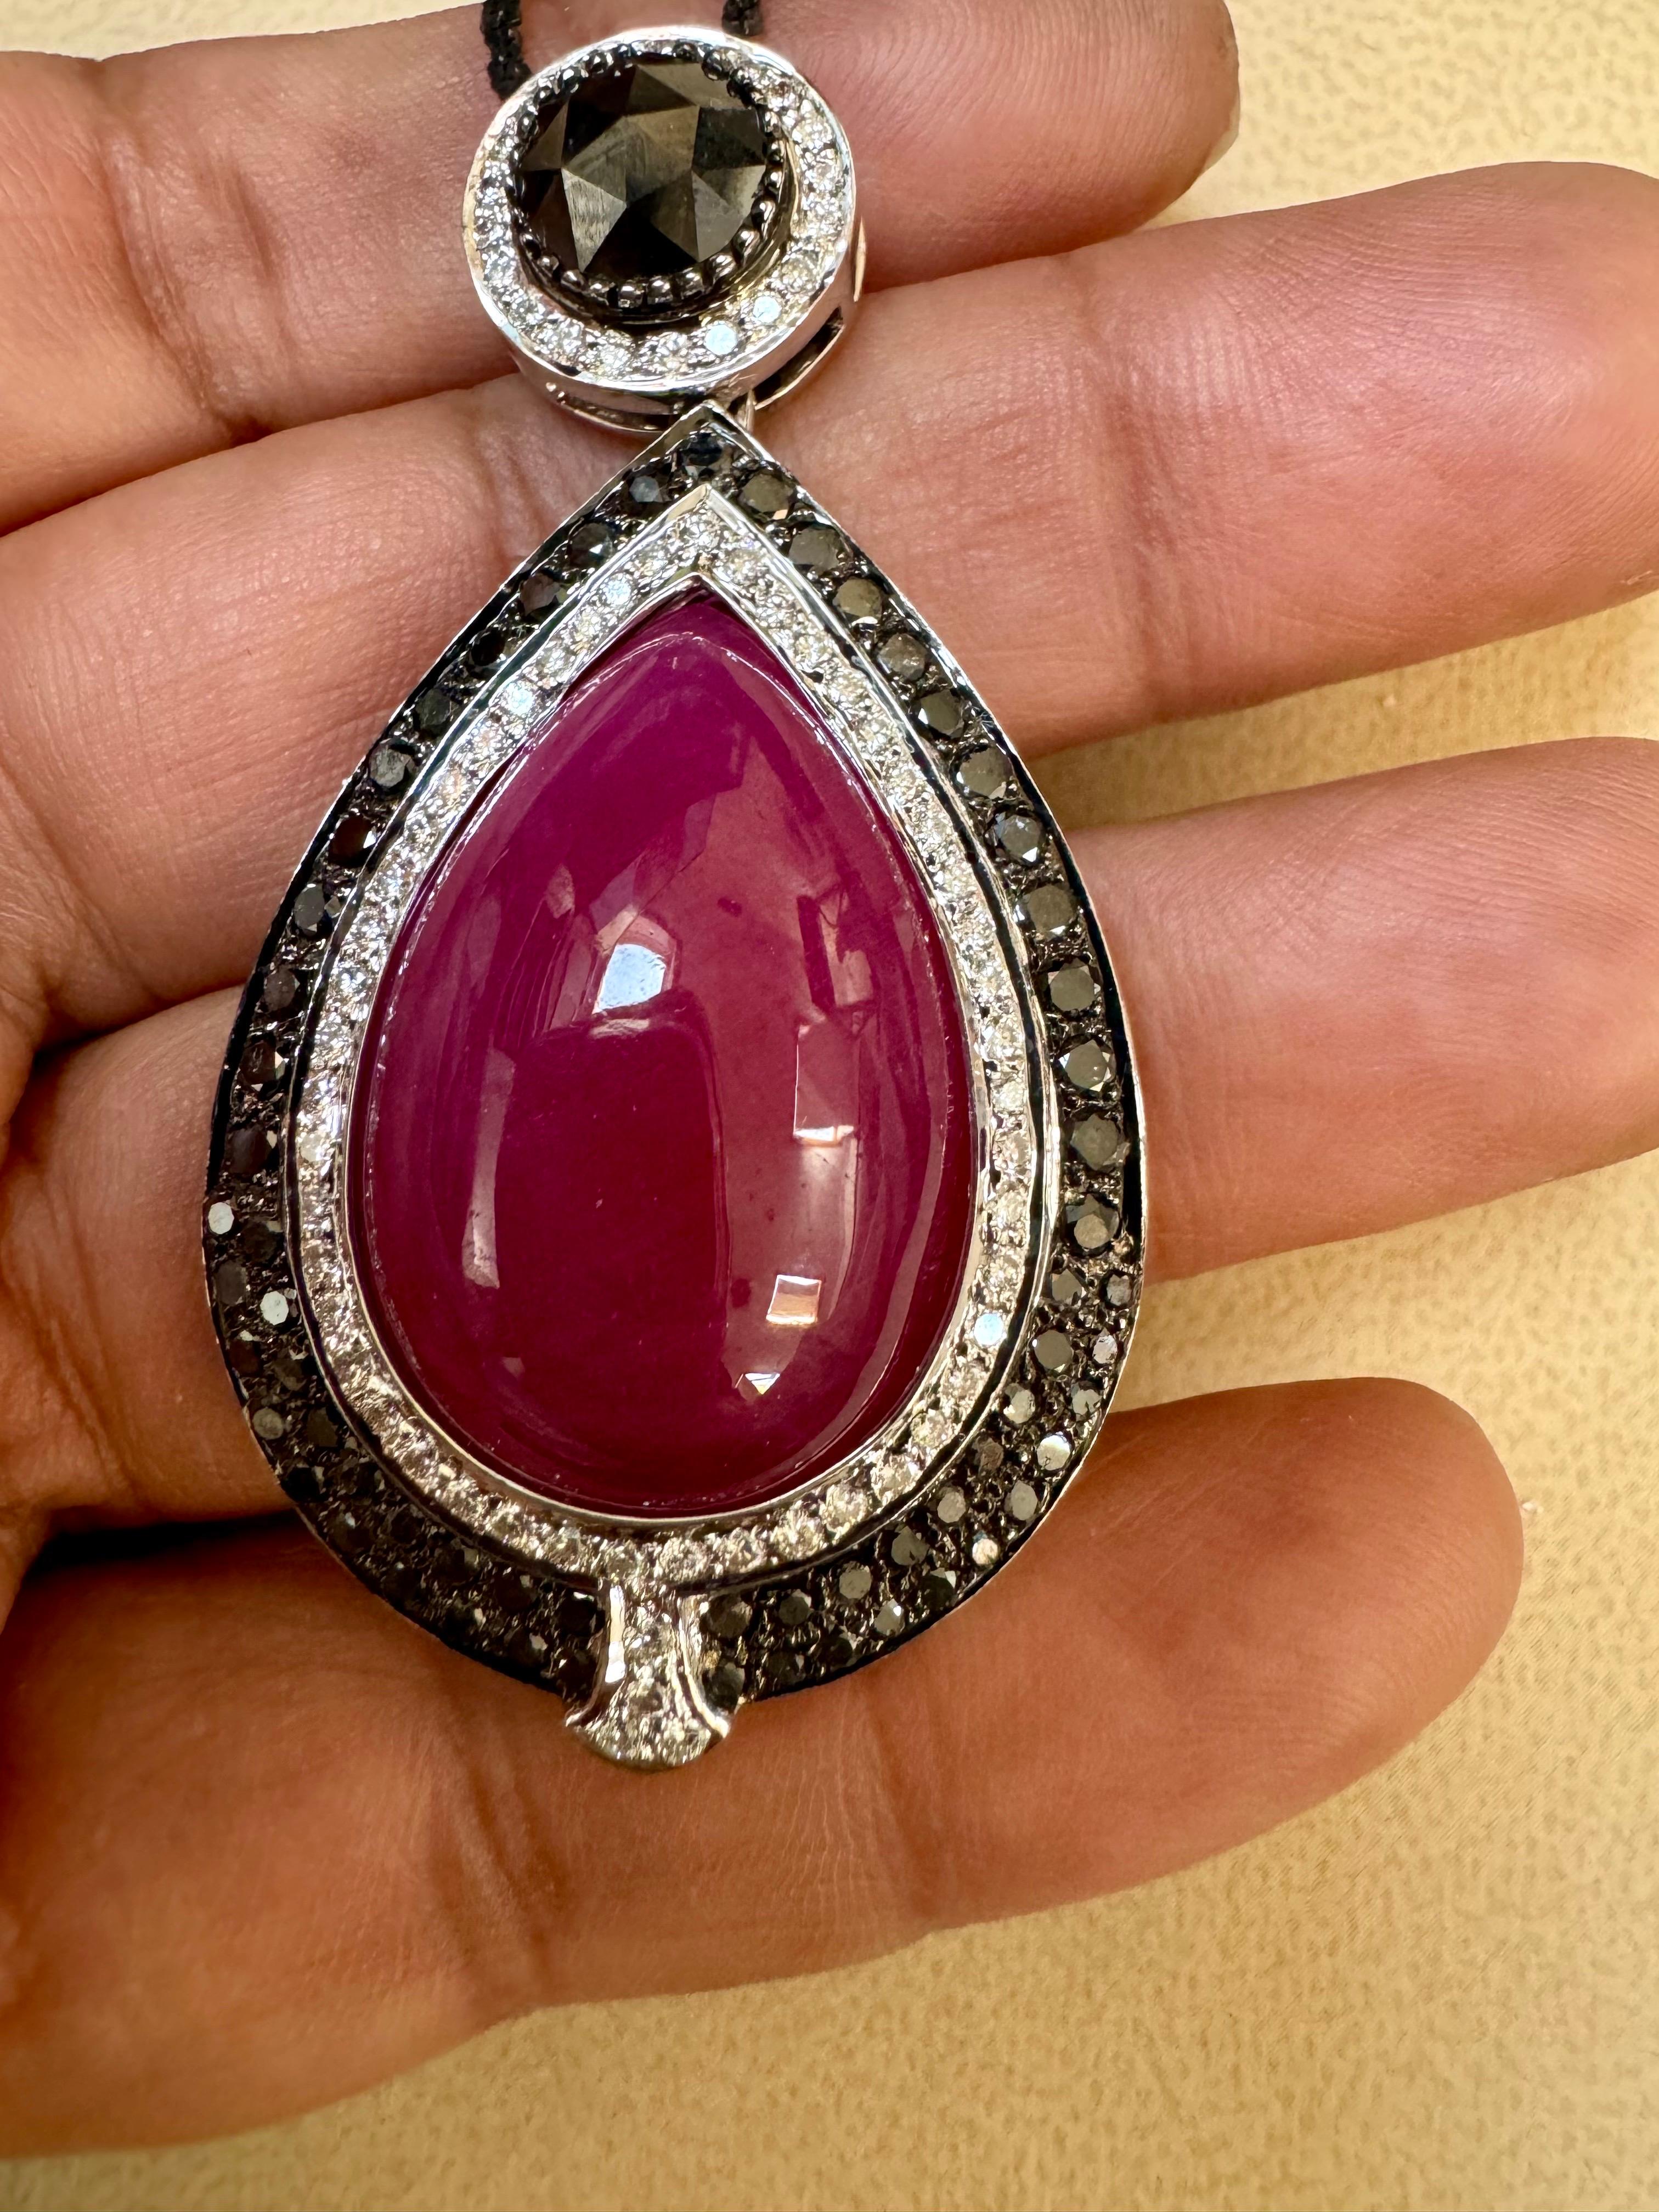  Pendant & Earring Suite 60Ct Natural Ruby No Heat & Black & White Diamond 18KWG
This Large eye catching Pendant Necklace with matching earrings are  crafted from 18 Karat gold and features large Pear-shaped  natural Rubies, totaling approximately 